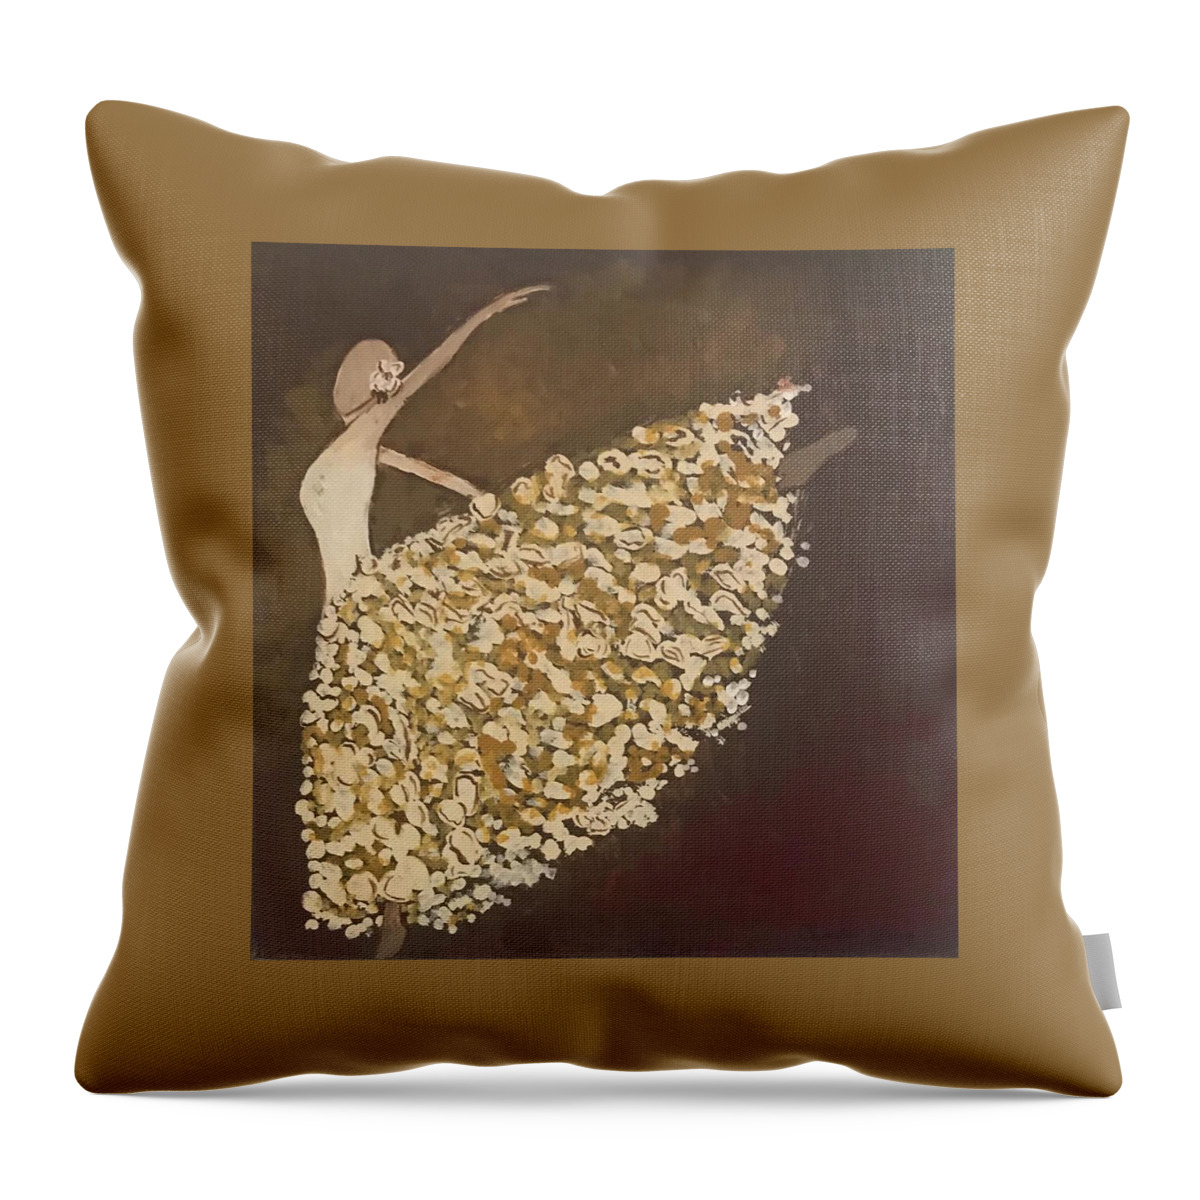  Throw Pillow featuring the painting Forever Dance by Charles Young